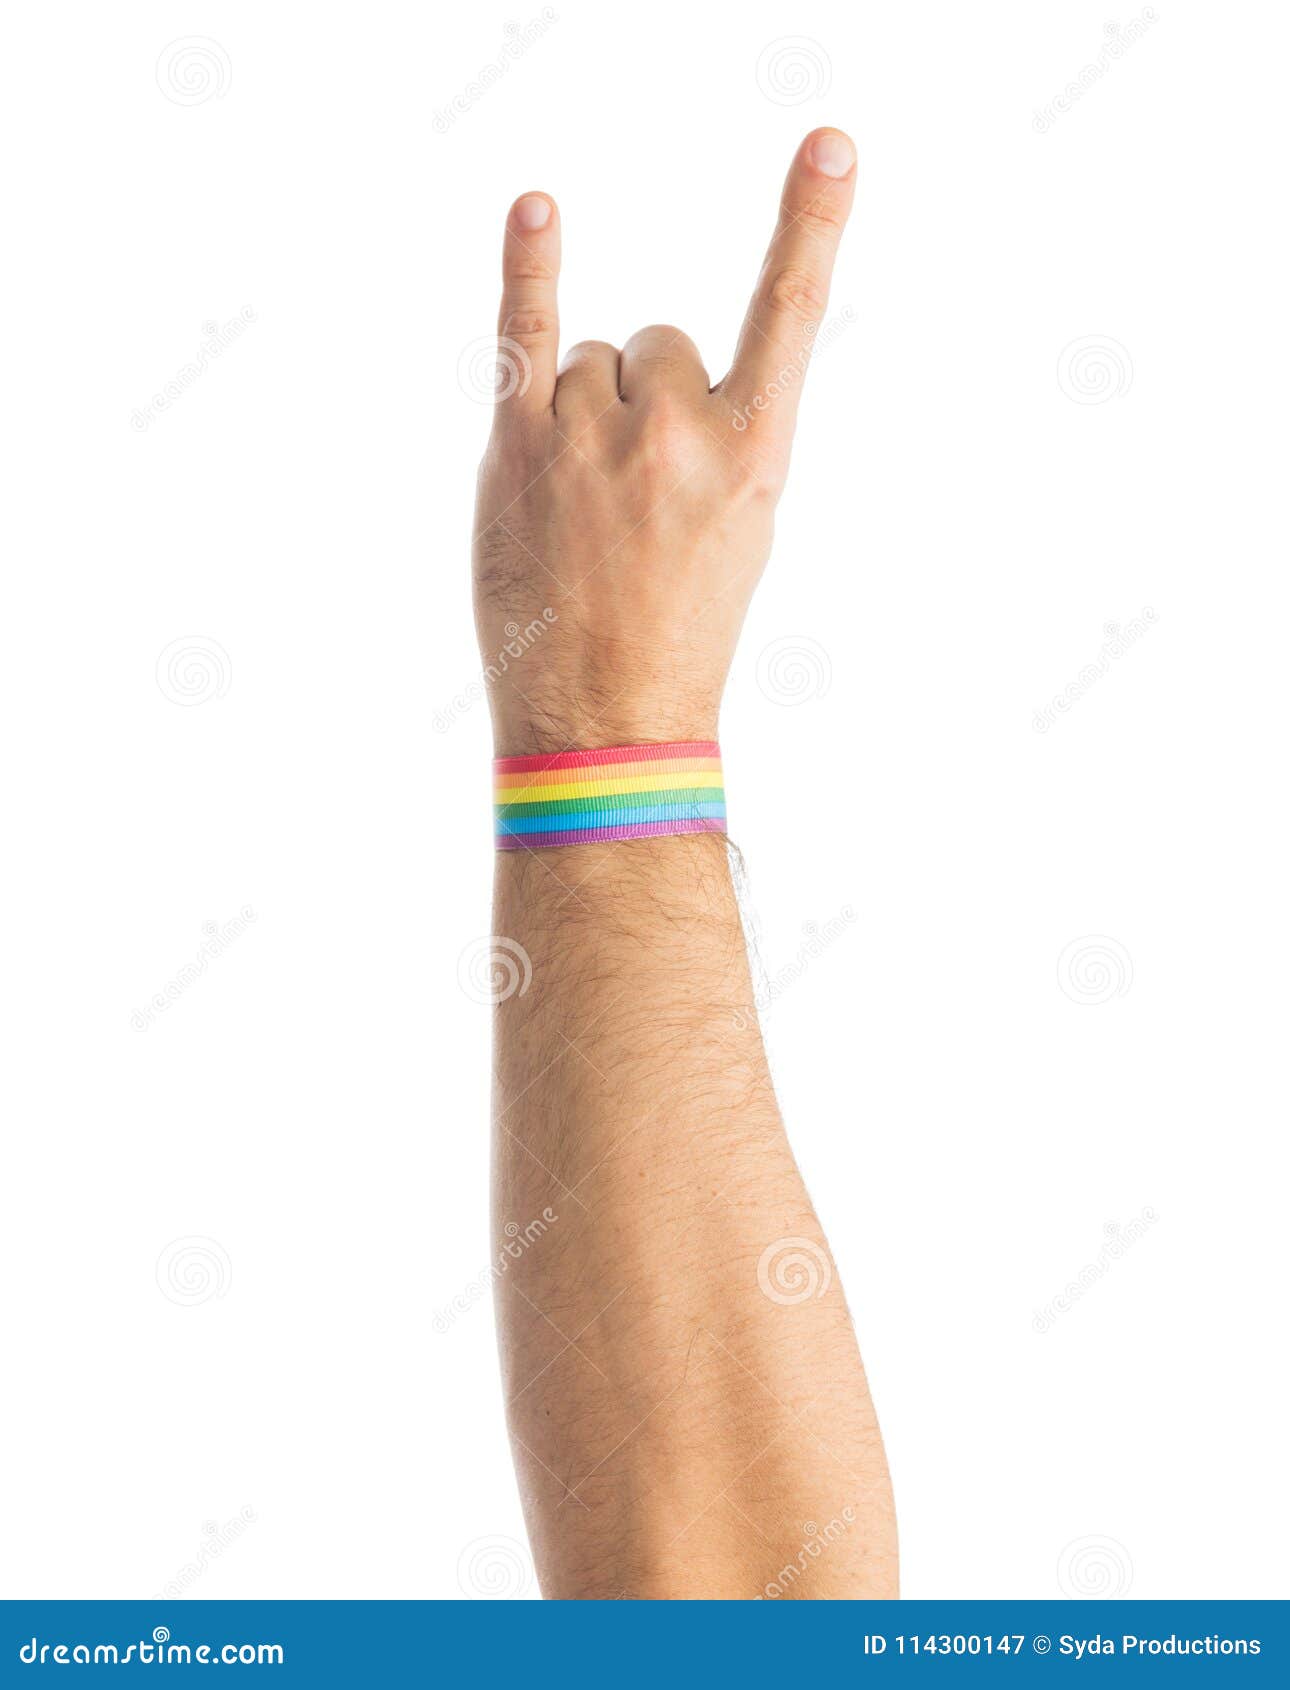 Hand With Gay Pride Rainbow Wristband Shows Rock Stock Image Image Of Awareness Samesex